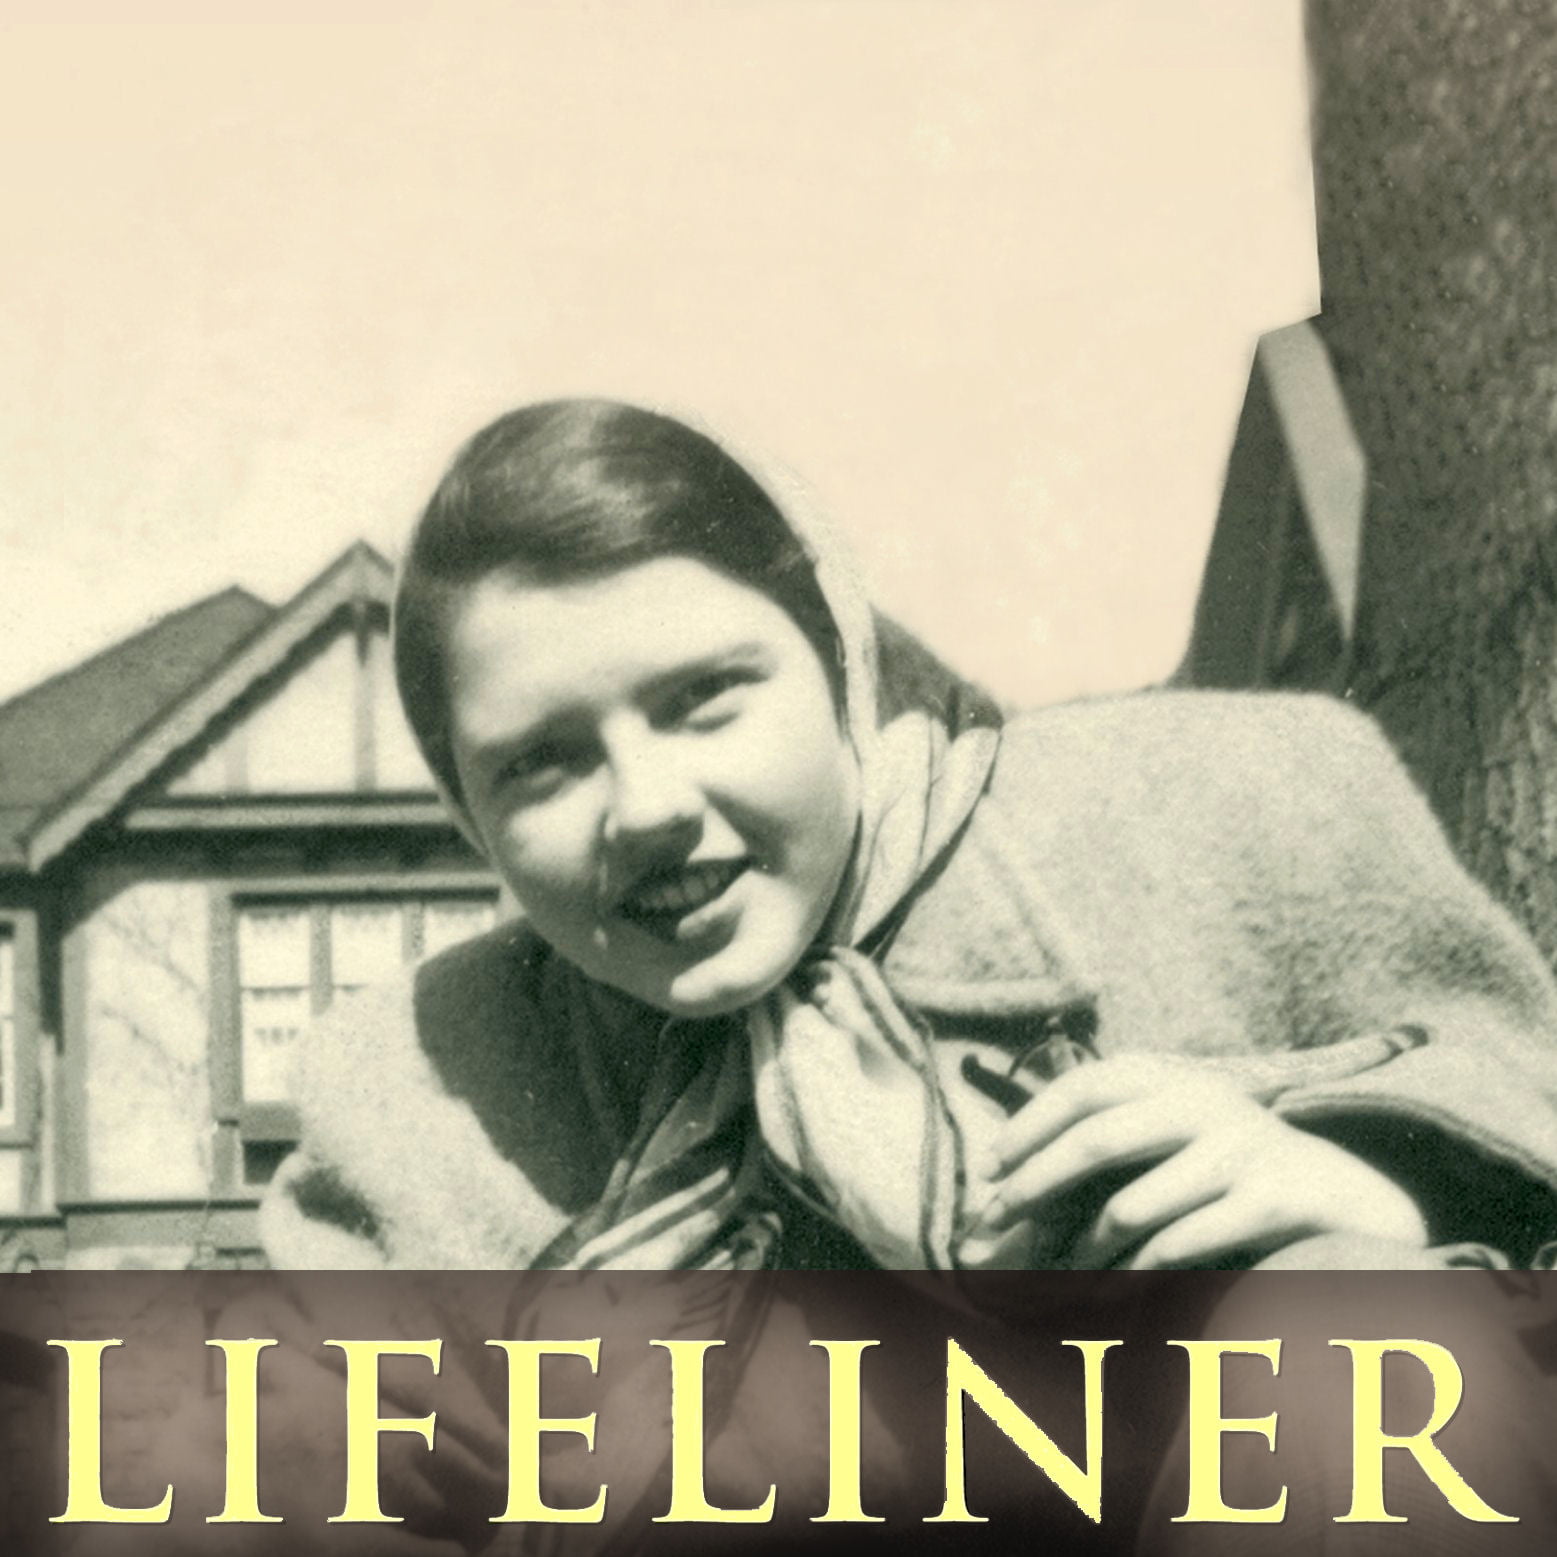 Lifeliner title in banner beneath Judy's portrait in sepia tones. Square Featured Image